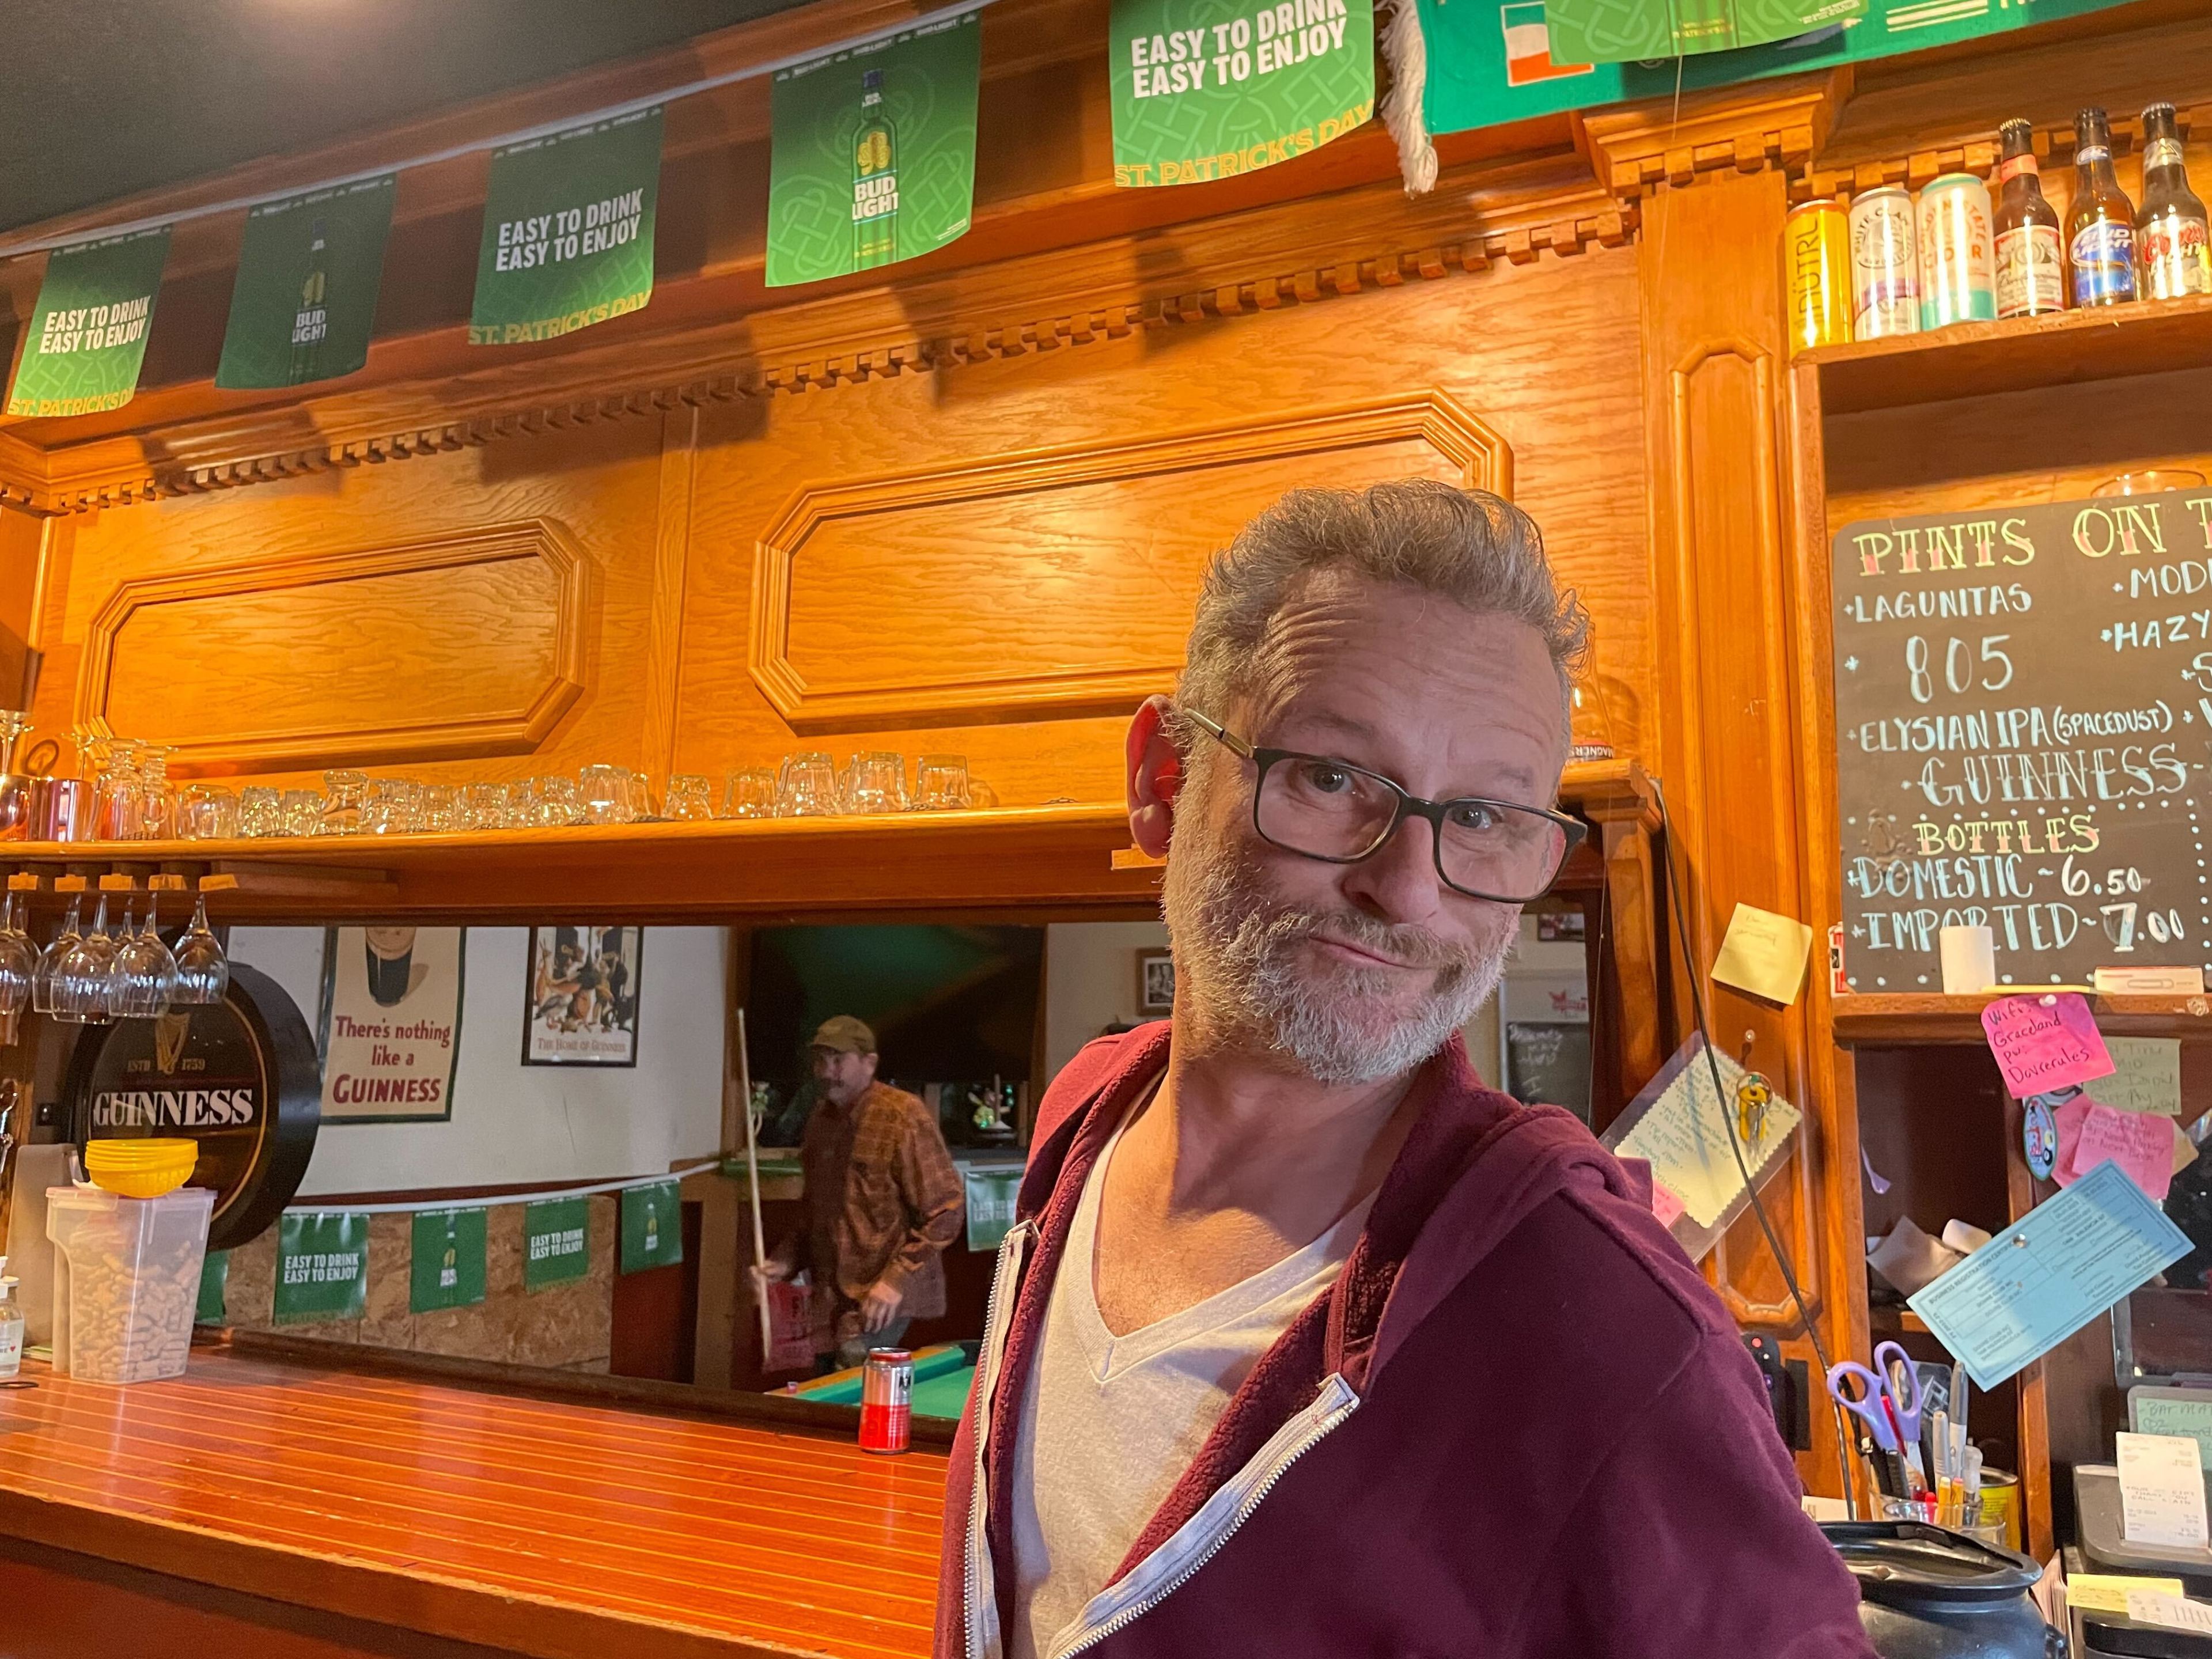 A man leaning on a pub bar with beer taps, glasses, and a price board in the background.